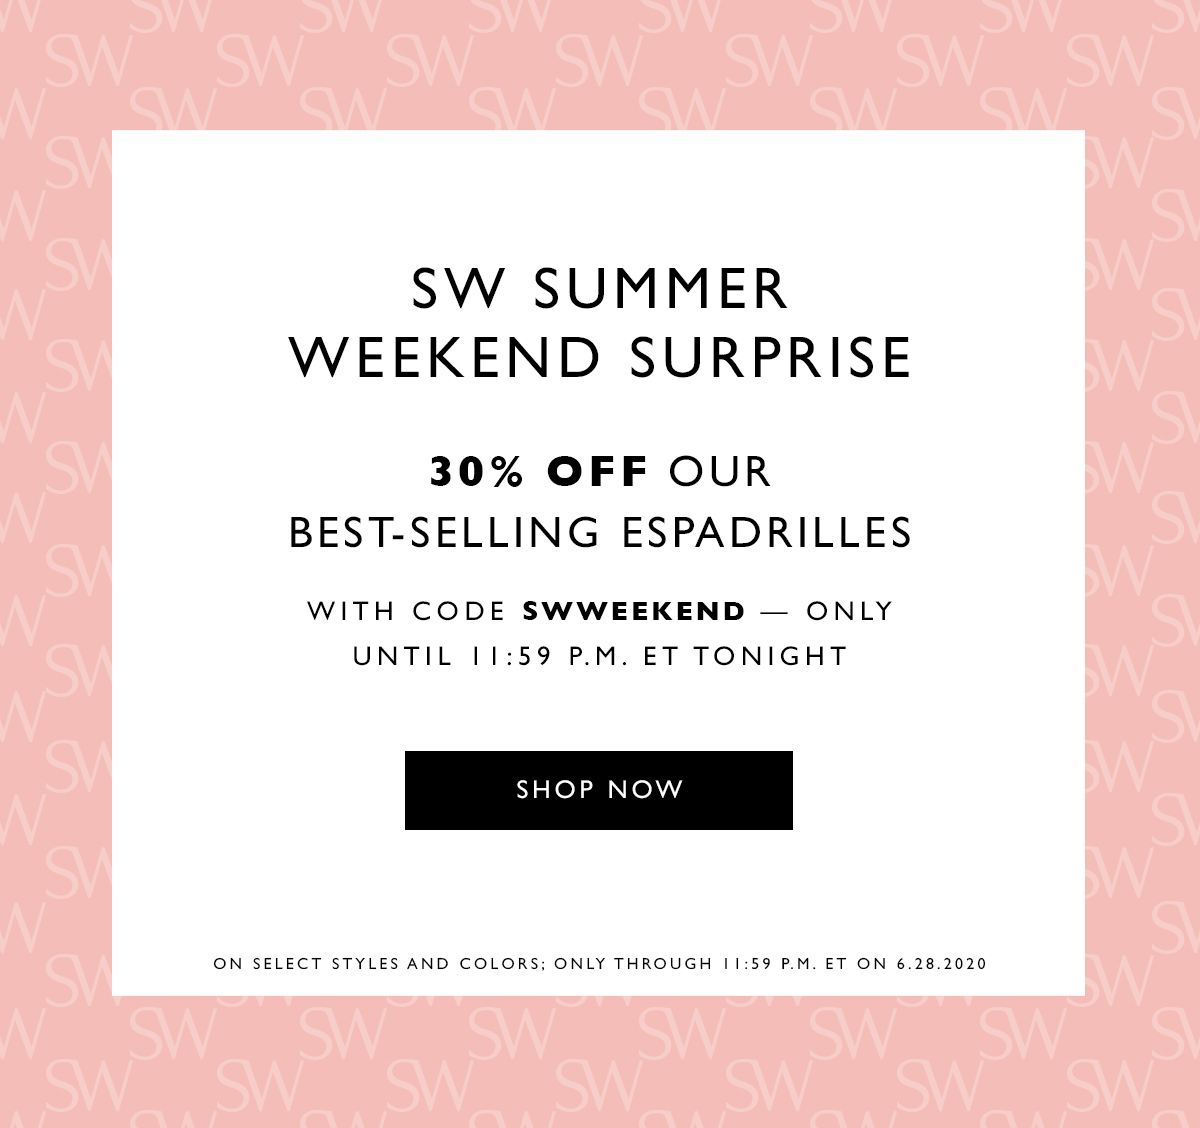  SW Summer Weekend Surprise. 30% off our best-selling espadrilles with code SWWEEKEND — only until 11:59 P.M. ET tonight . SHOP NOW. On select styles and colors; only through 6.28.2020